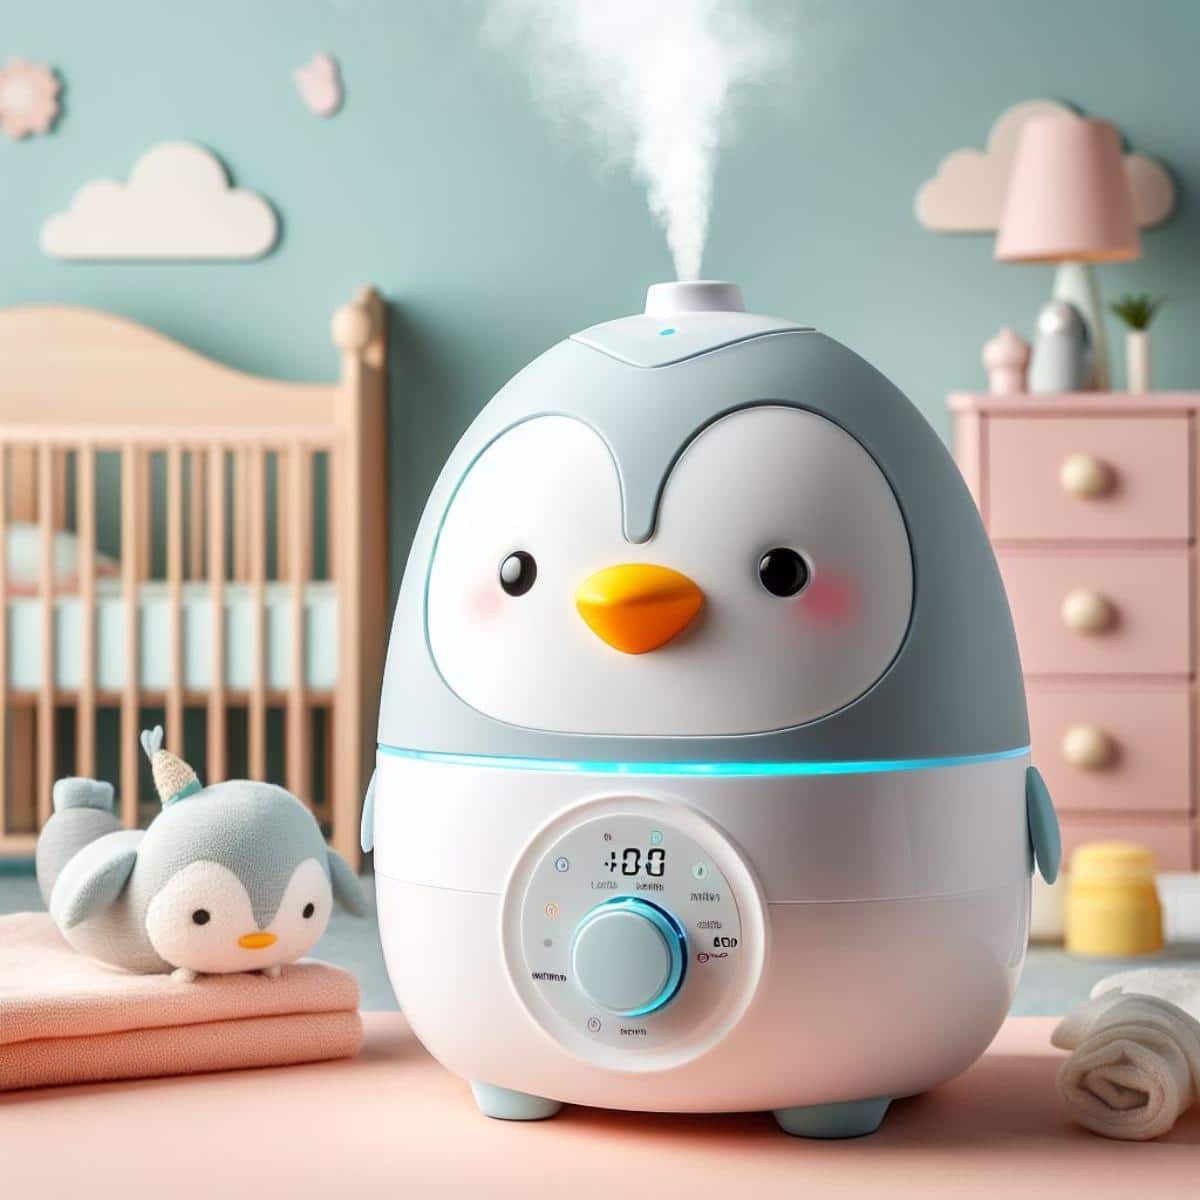 Recommended Humidifiers for Babies in the UK